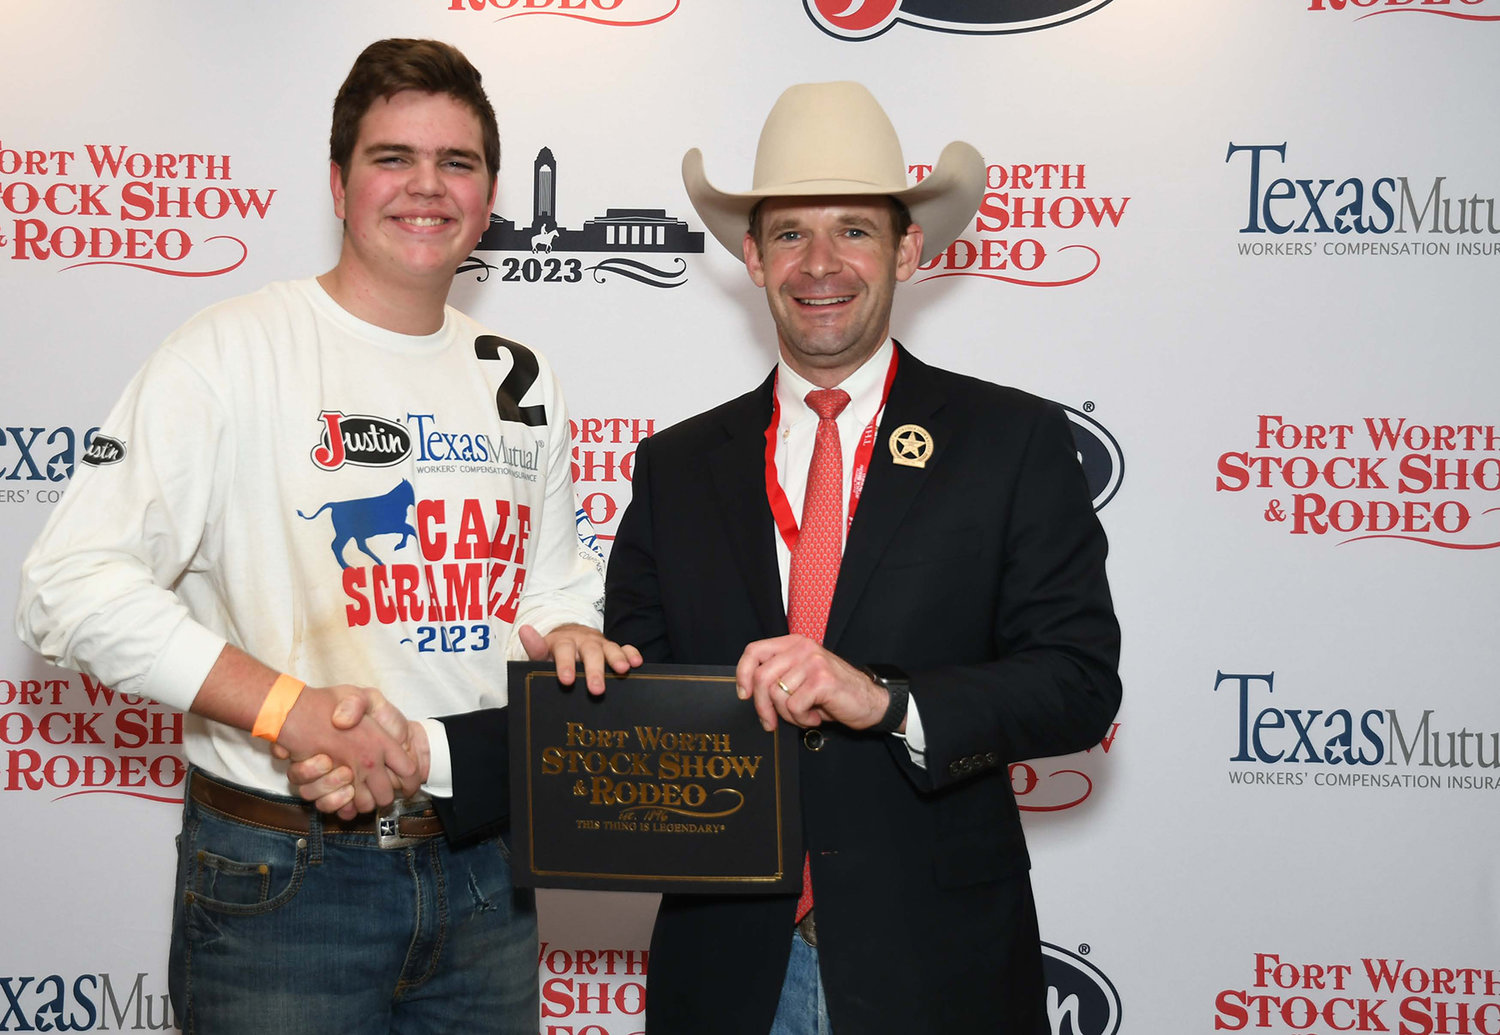 Phoenix Lanford won a $500 purchase certificate toward a beef or dairy heifer for a 4-H or FFA project for exhibition at next year’s Fort Worth Stock Show & Rodeo. The certificate, presented by Stock Show Calf Scramble Committee member, Paxton Motheral, was sponsored by Therrell Family.